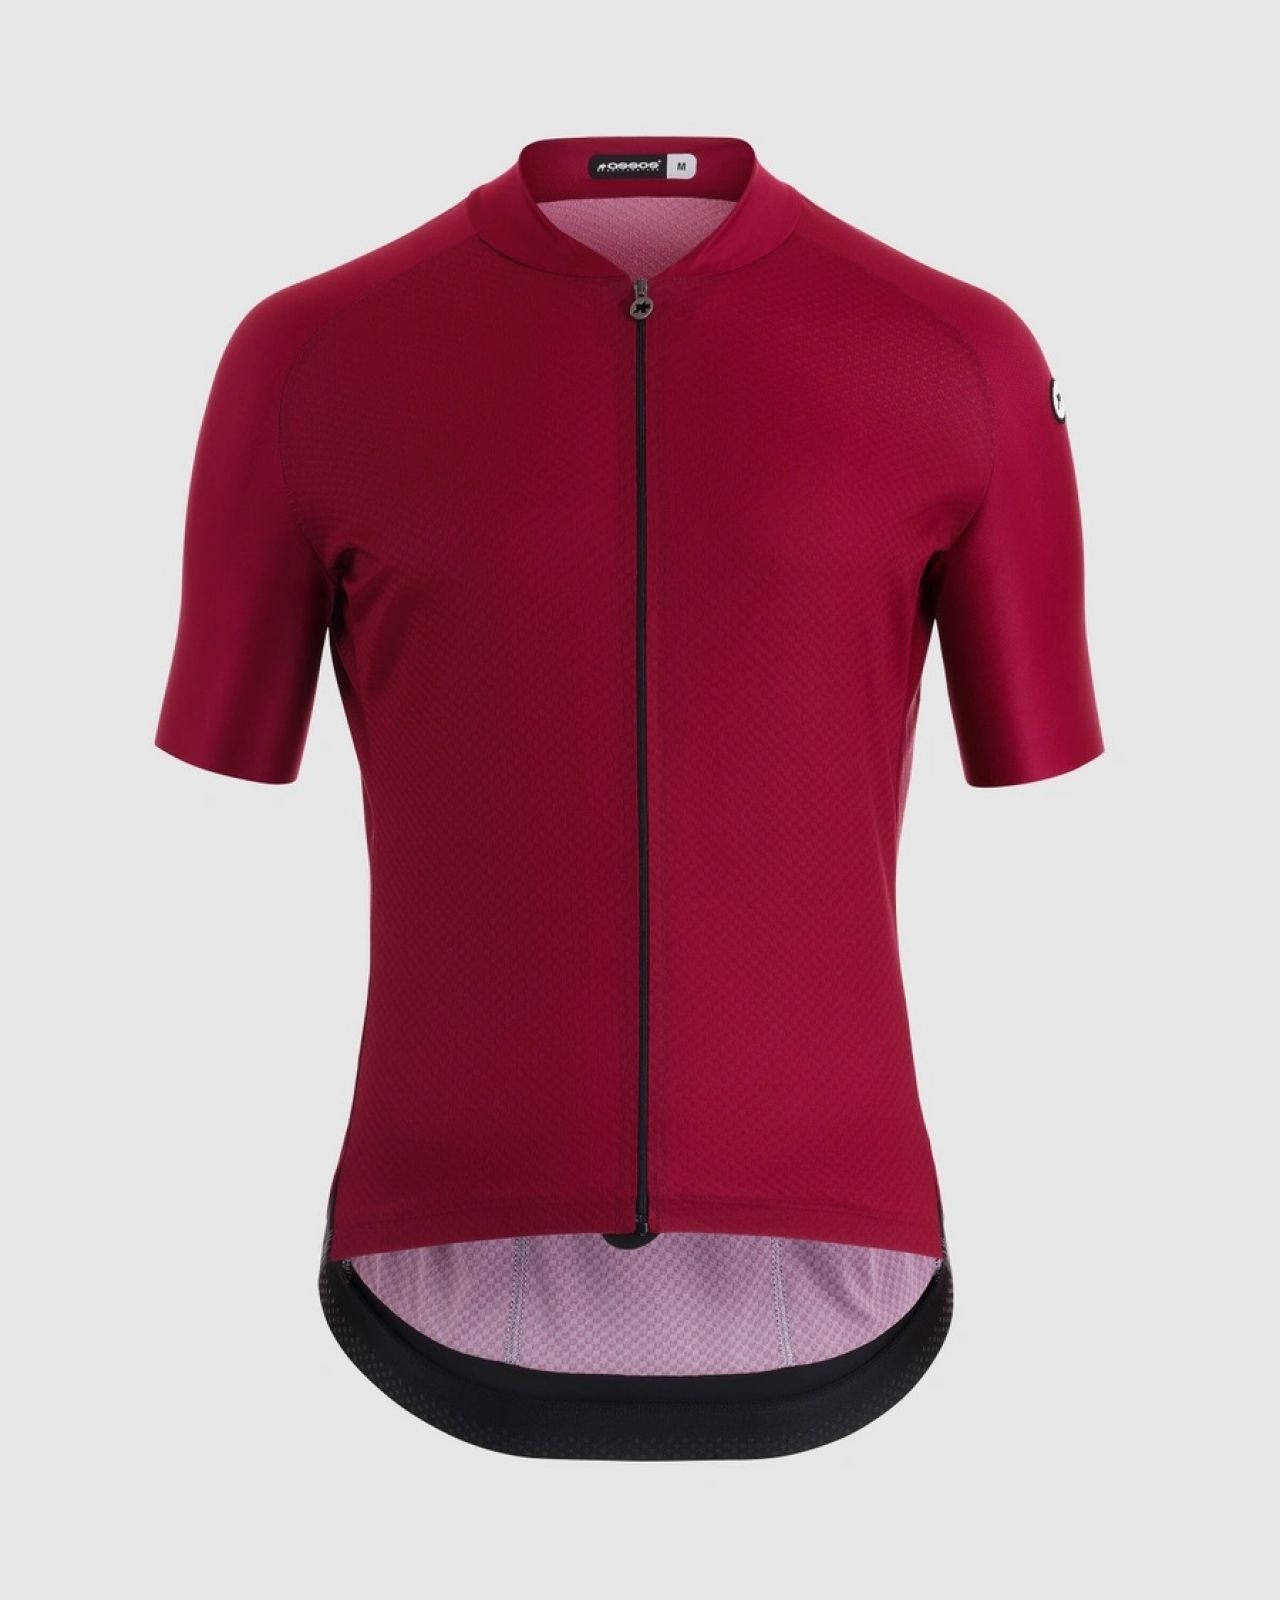 ASSOS MILLE GT JERSEY C2 EVO STAHLSTERN BOLGHERI RED Maillot vélo